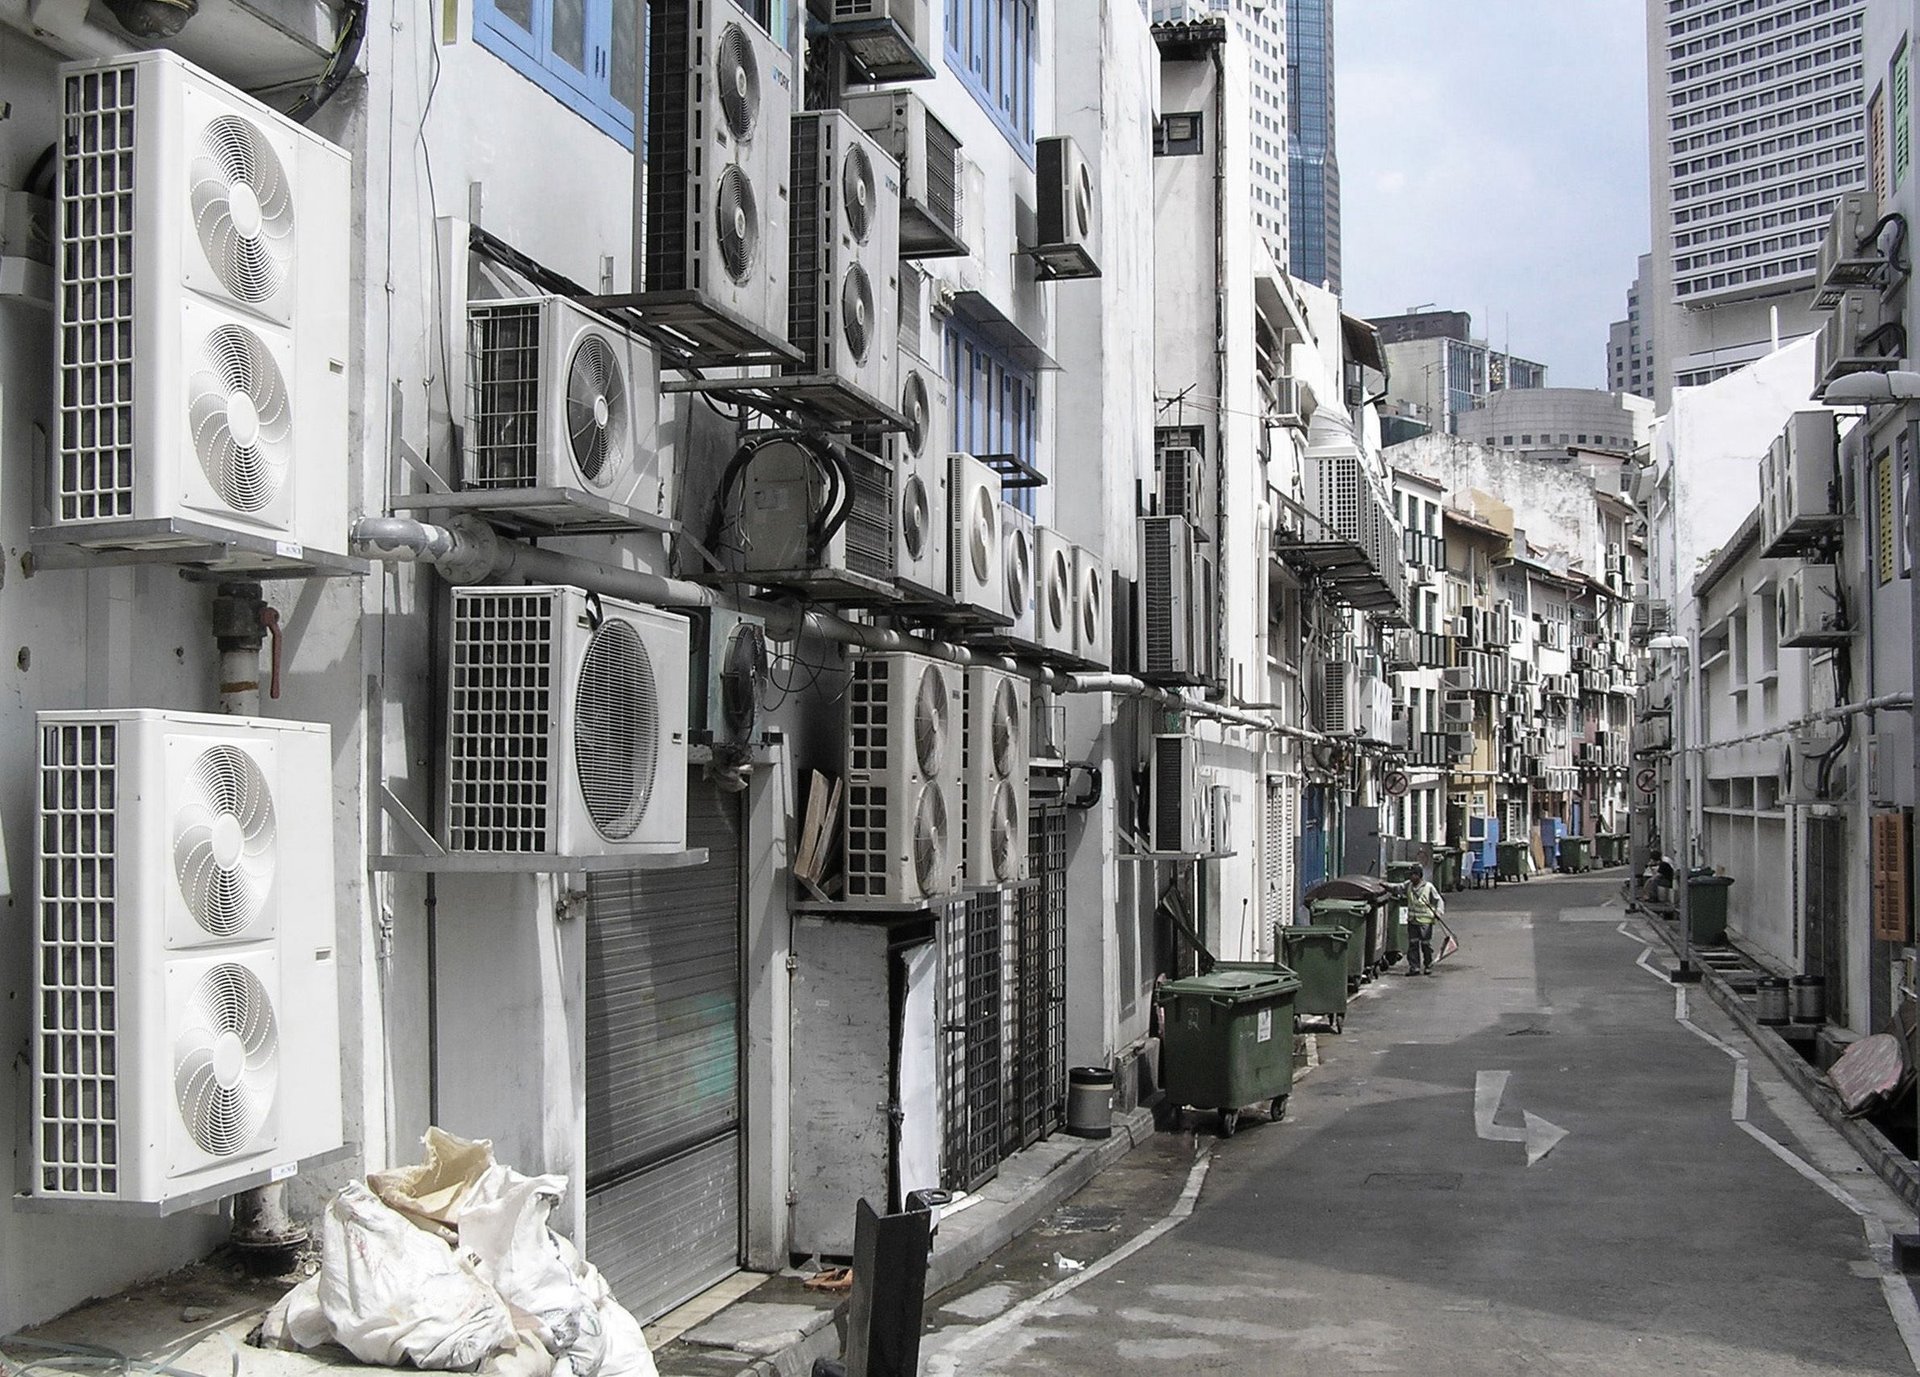 Grave needs of air conditioning in Singapore apartment block. Shutterstock